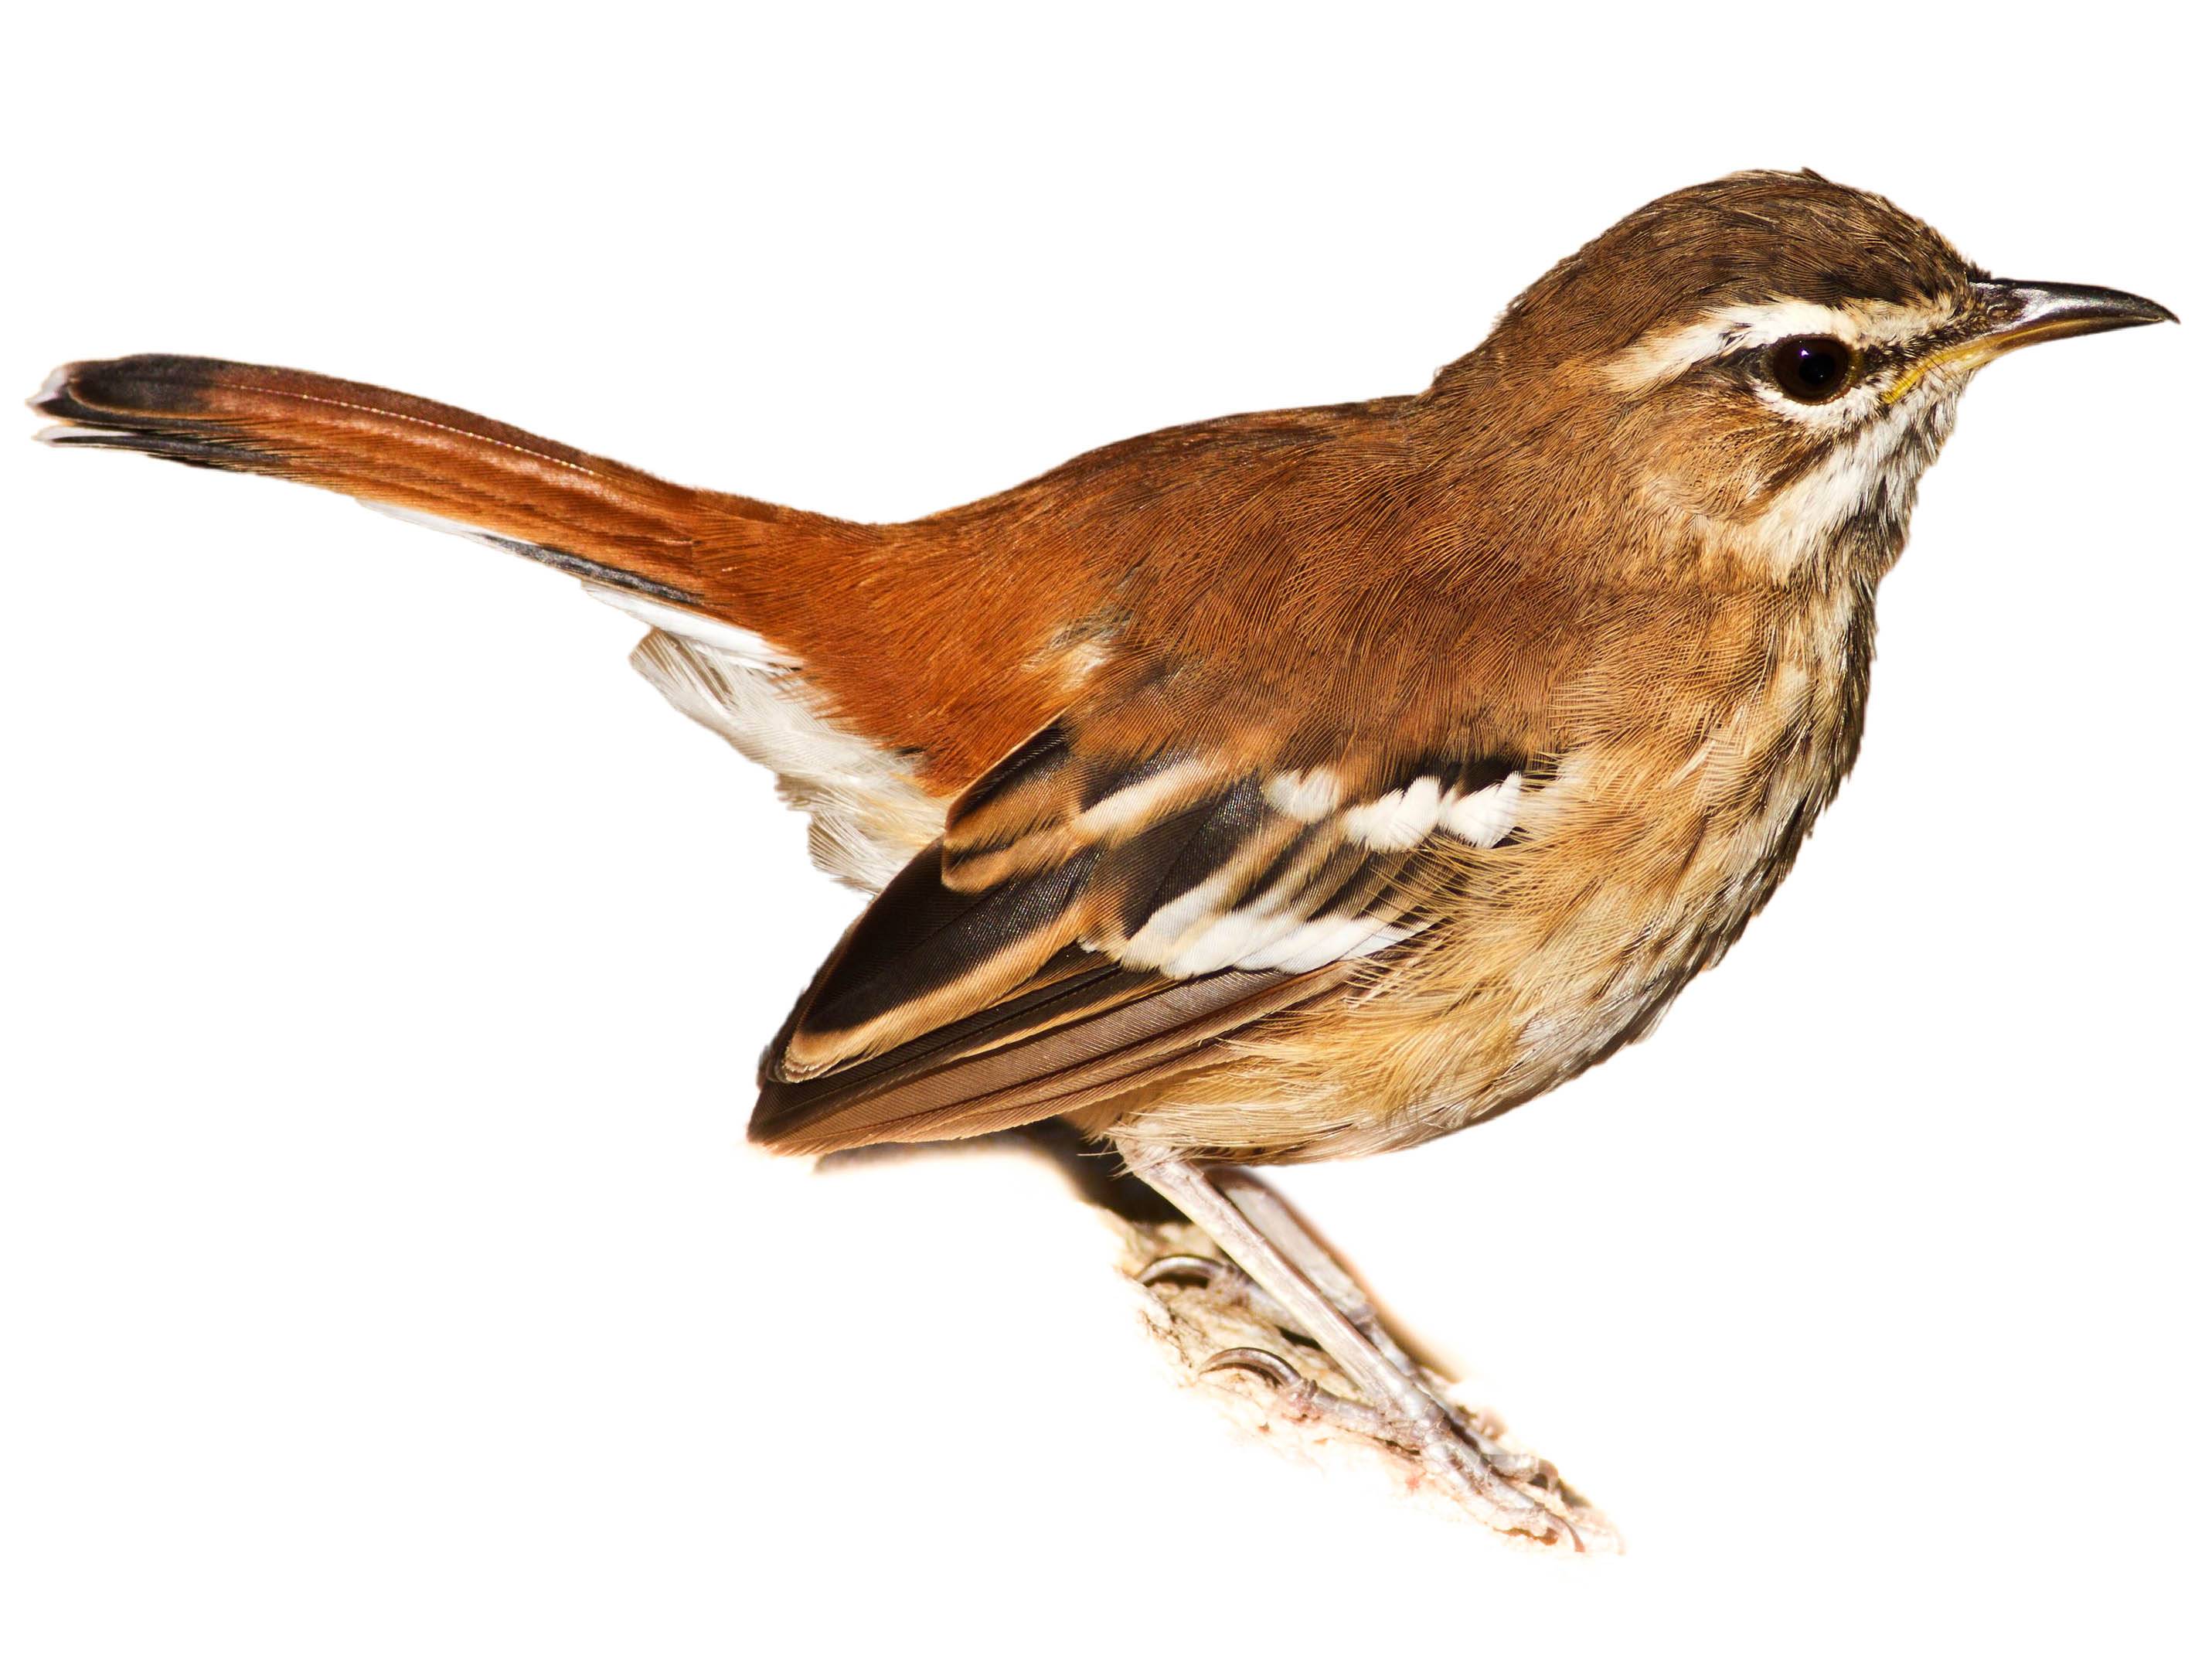 A photo of a White-browed Scrub Robin (Cercotrichas leucophrys)